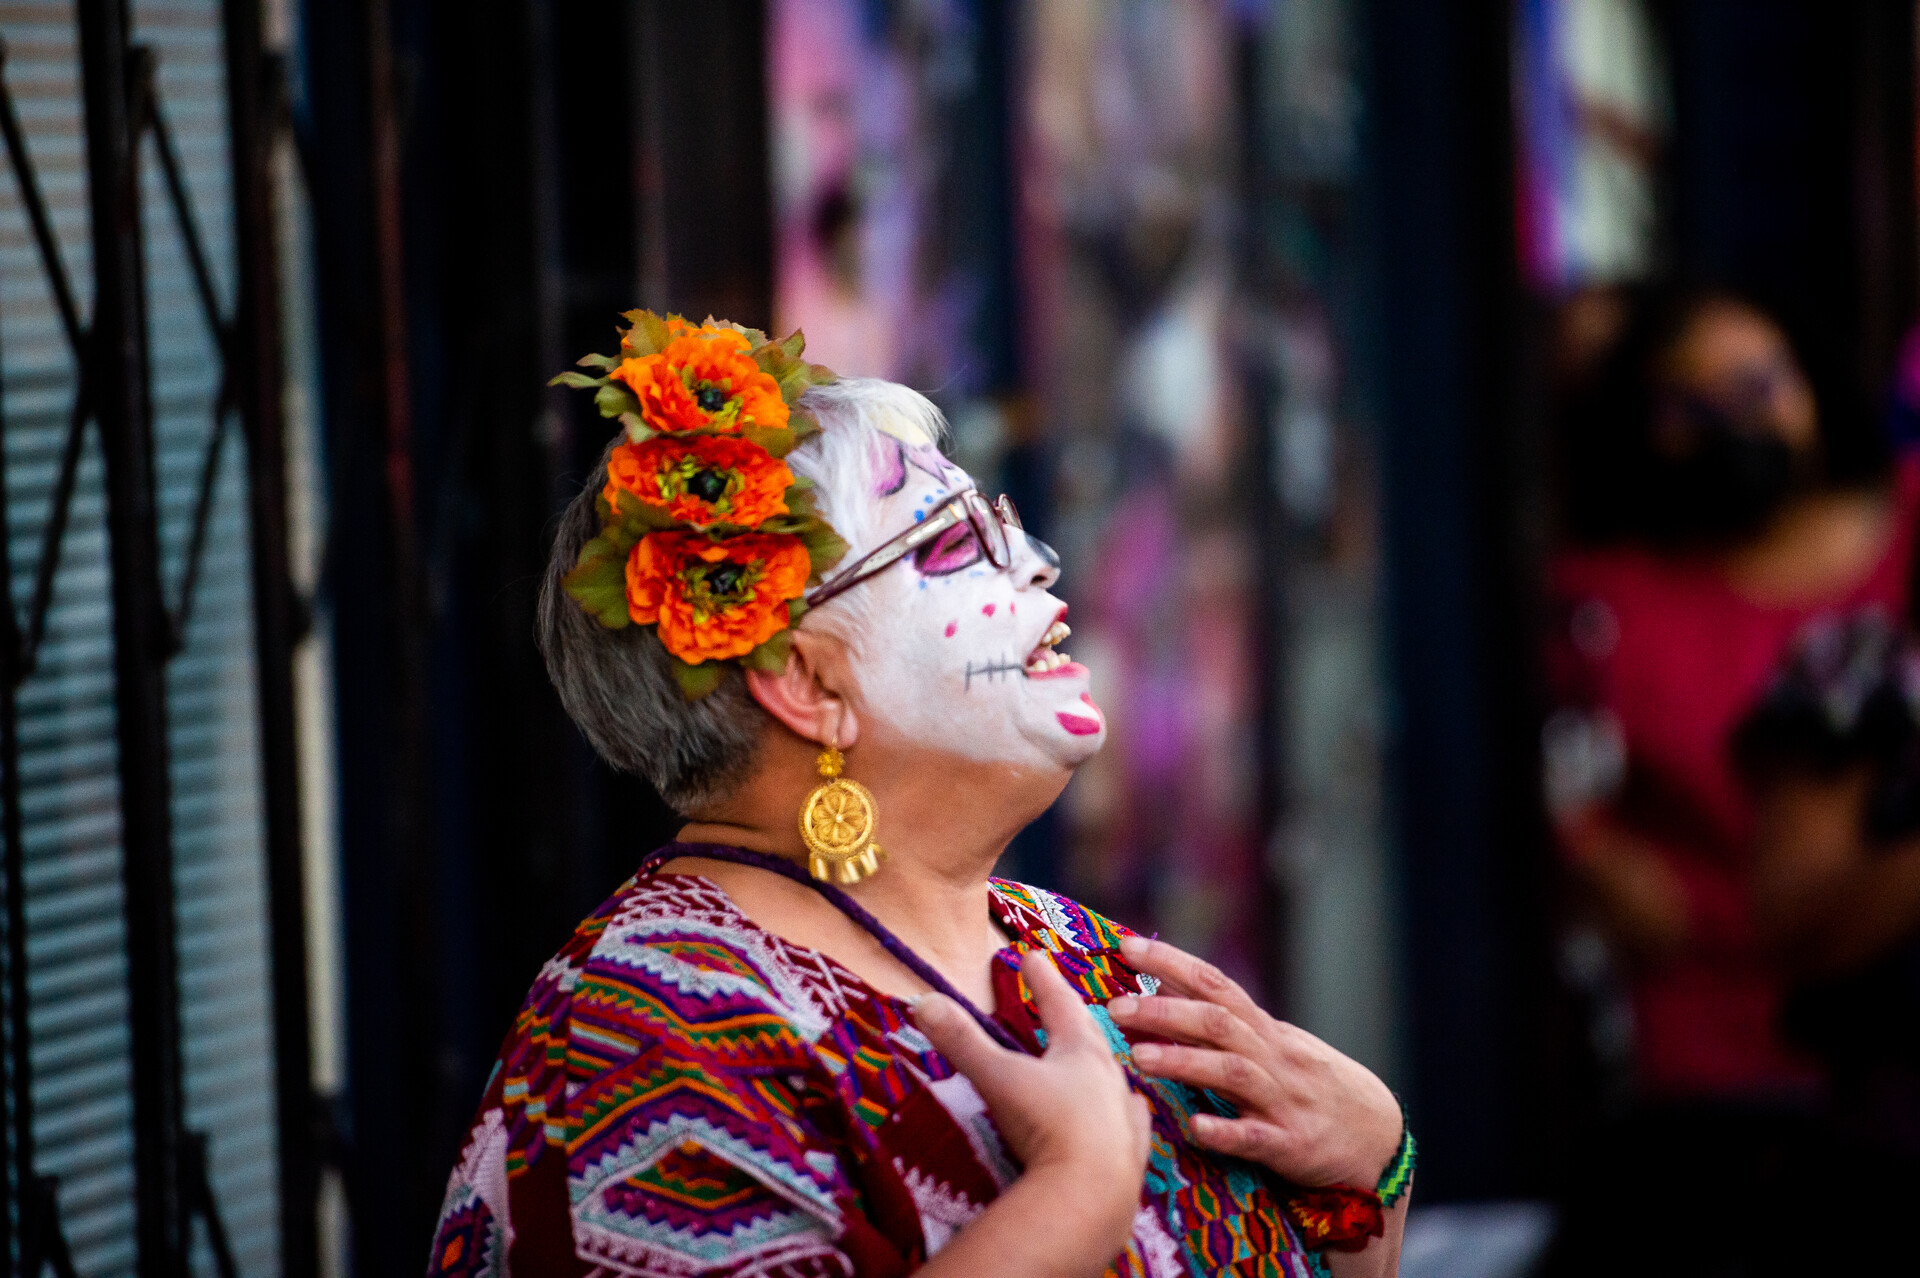 A woman wearing face paint and cemaspúchil in her hair sings to a crowd on the sidewalk.